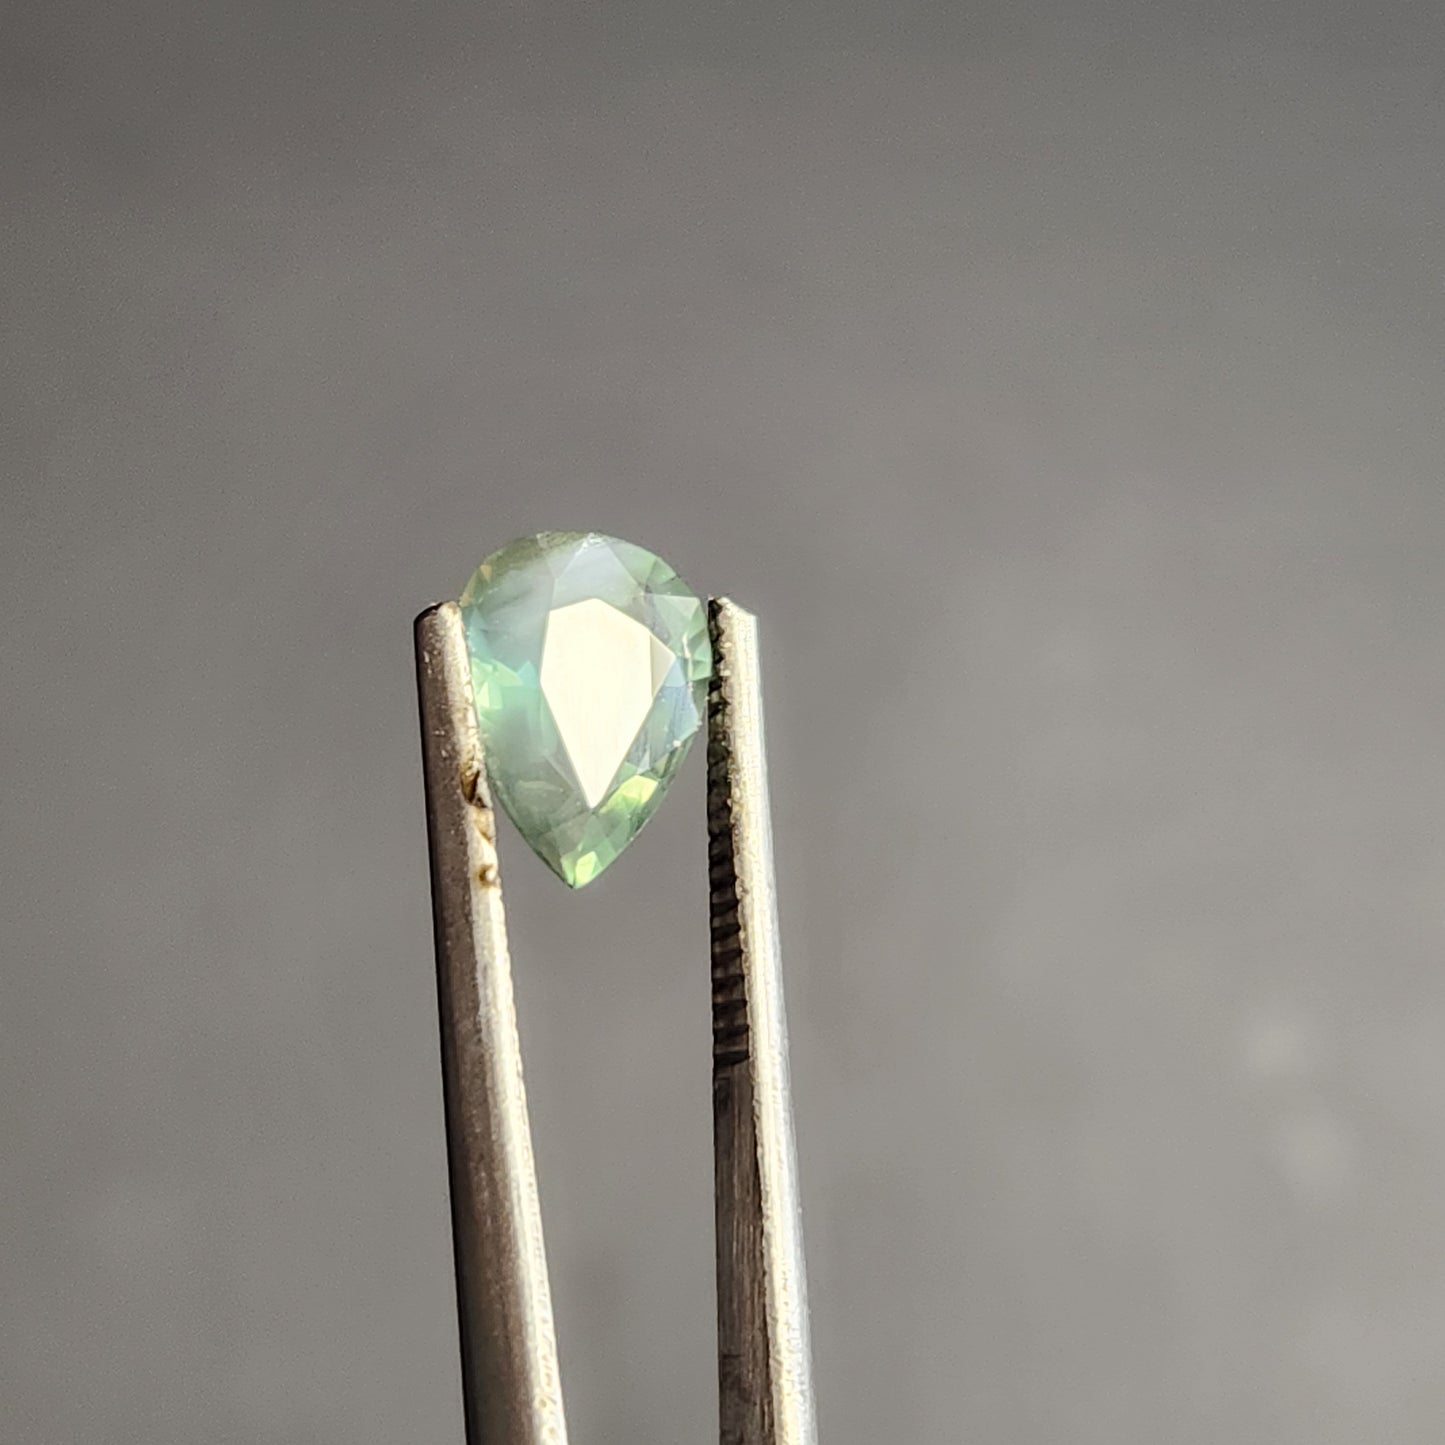 2.02 ct Pear Faceted Sapphire